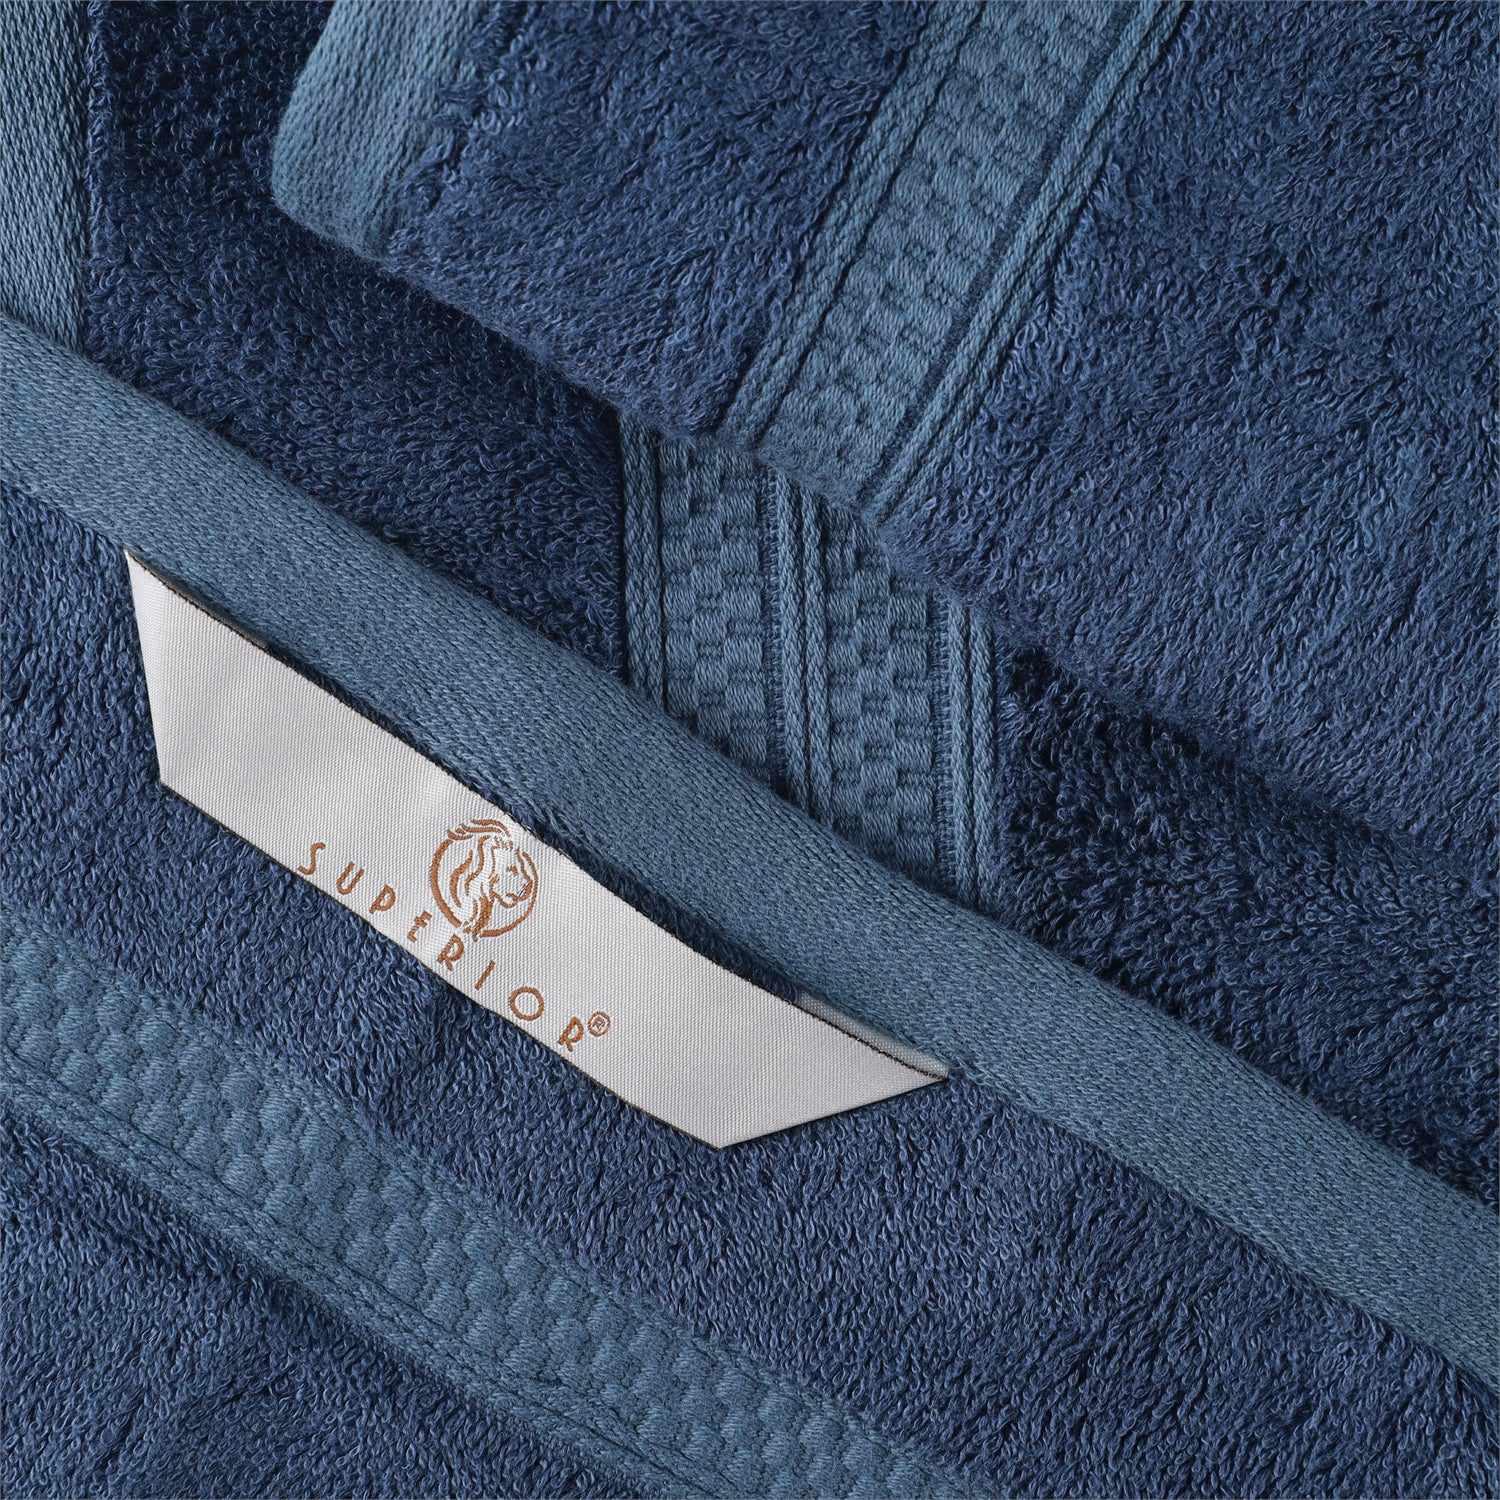  Ultra-Soft Hypoallergenic Rayon from Bamboo Cotton Blend Bath and Hand Towel Set -  Royal Blue